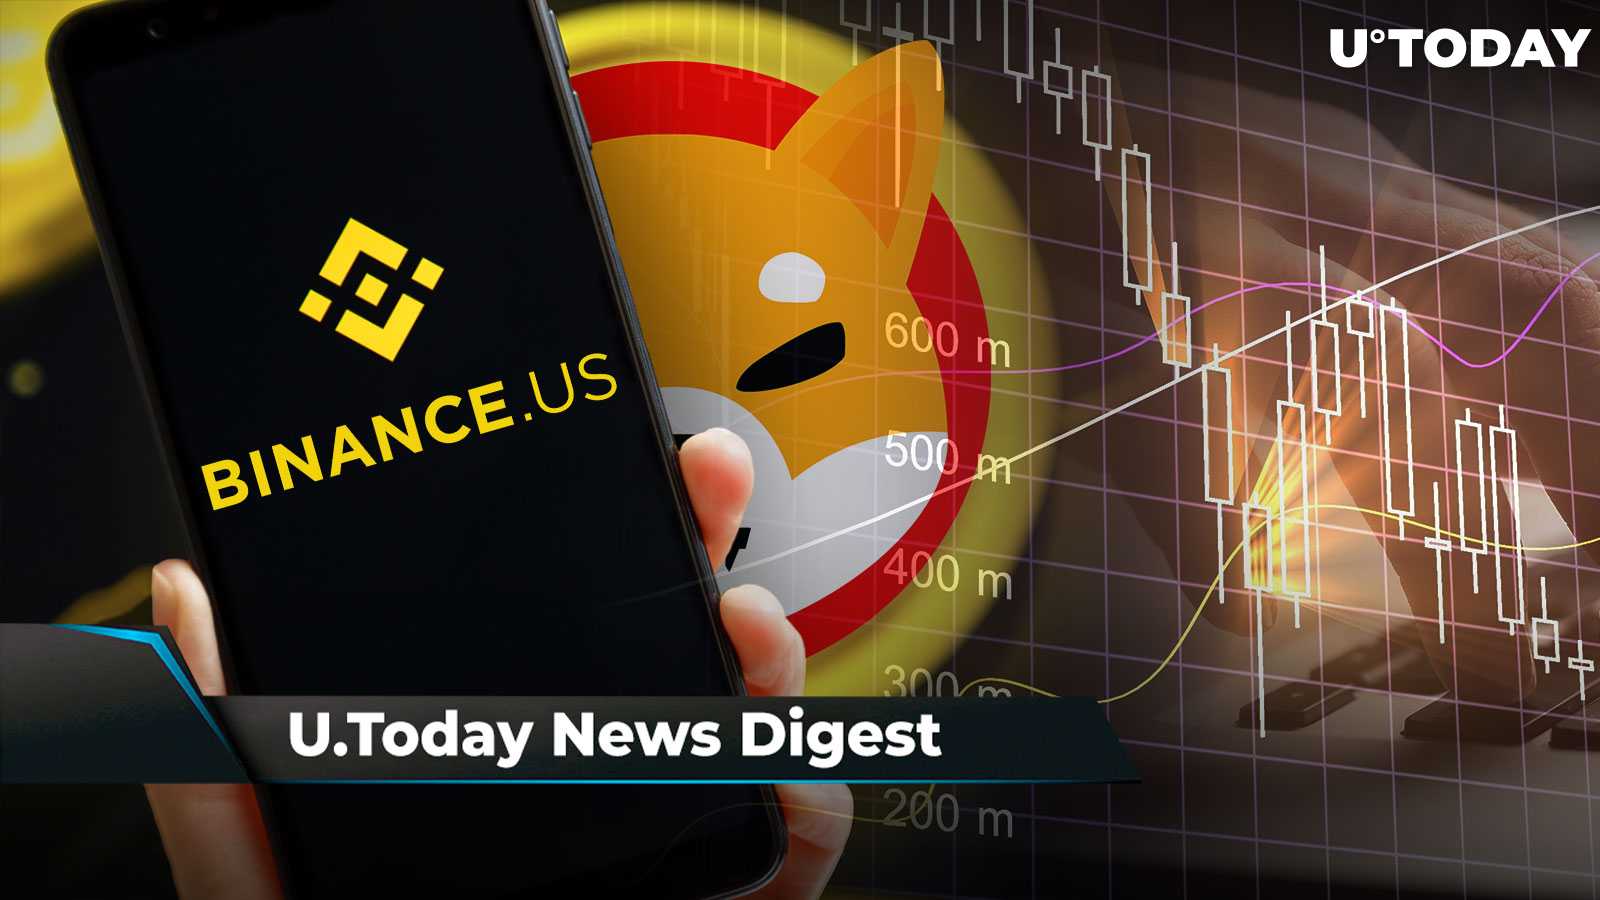 SHIB Lead Dev's Hints Led to Important Debut, New SHIB Pair Added by Binance US, 2.24 Trillion SHIB Liquidated by Bankrupt Crypto Broker: Crypto News Digest by U.Today